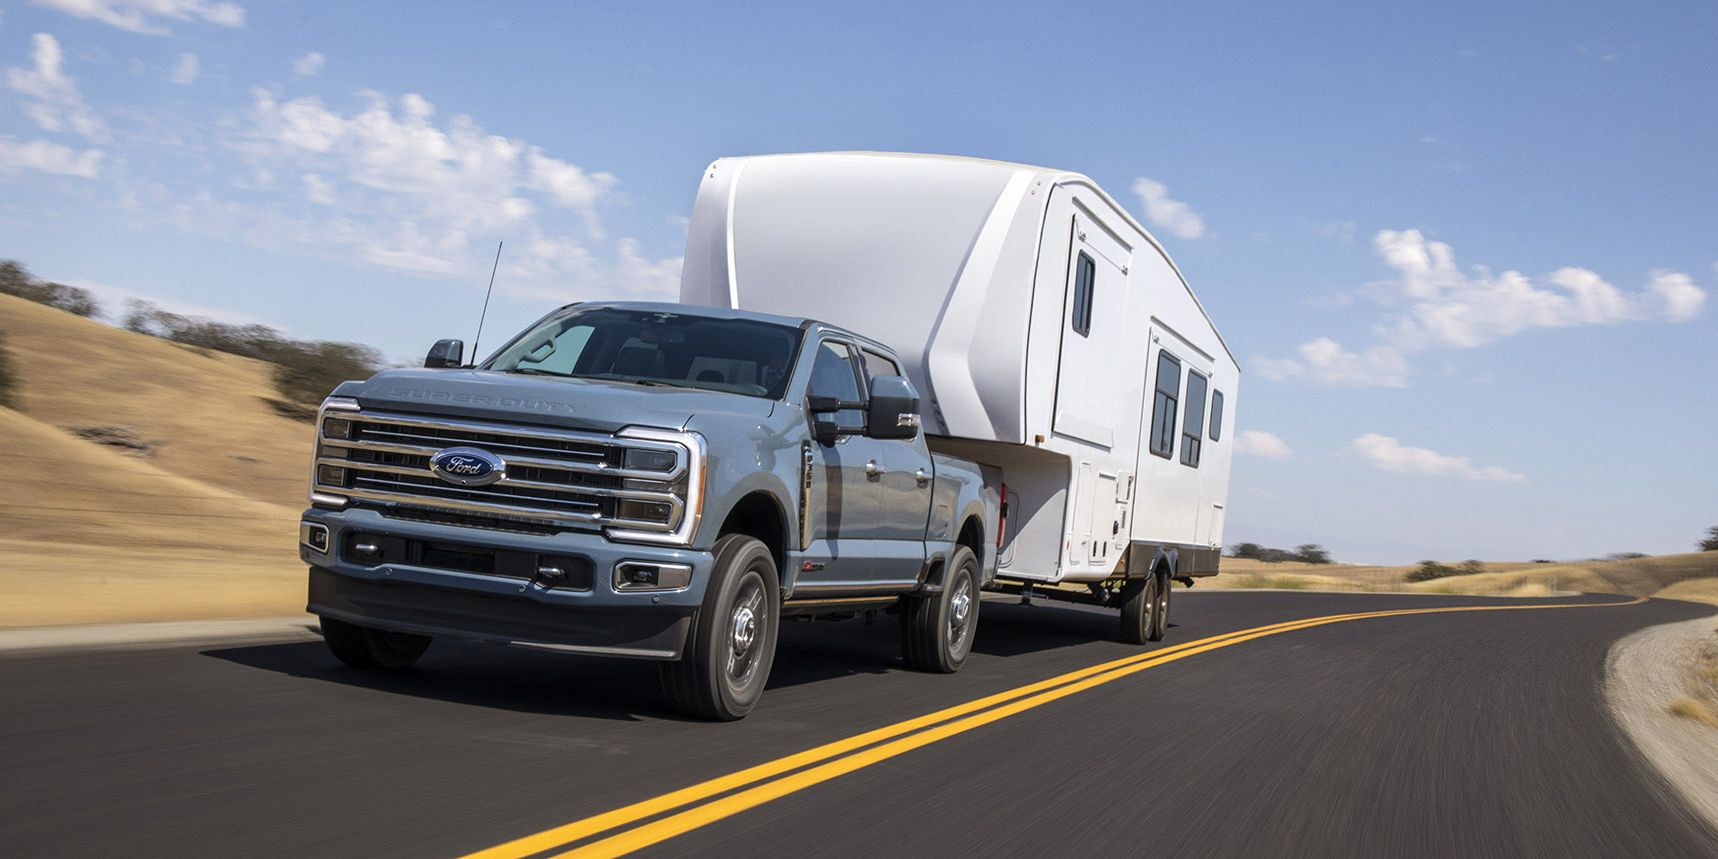 The New Ford Super Duty Has 500 HP and 1200 Lb-Ft of Torque